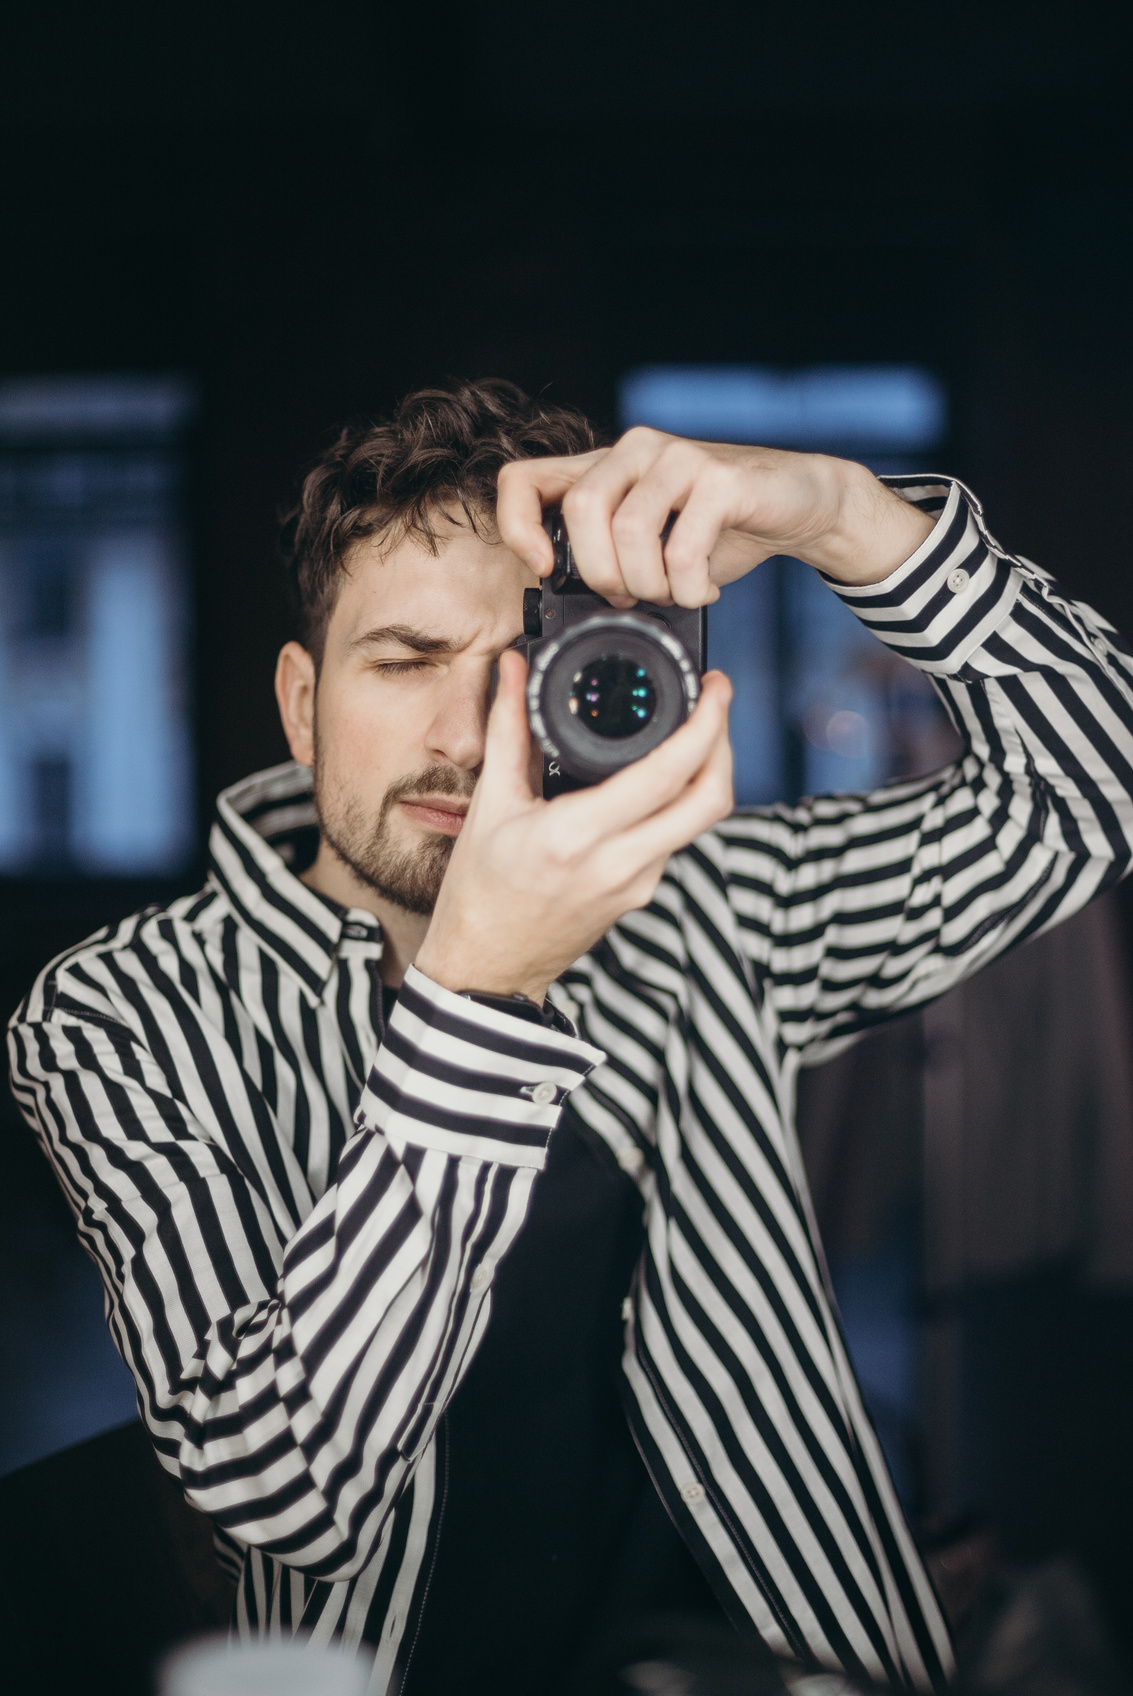 Man In Black And White Striped Long Sleeve Shirt Holding Black Camera